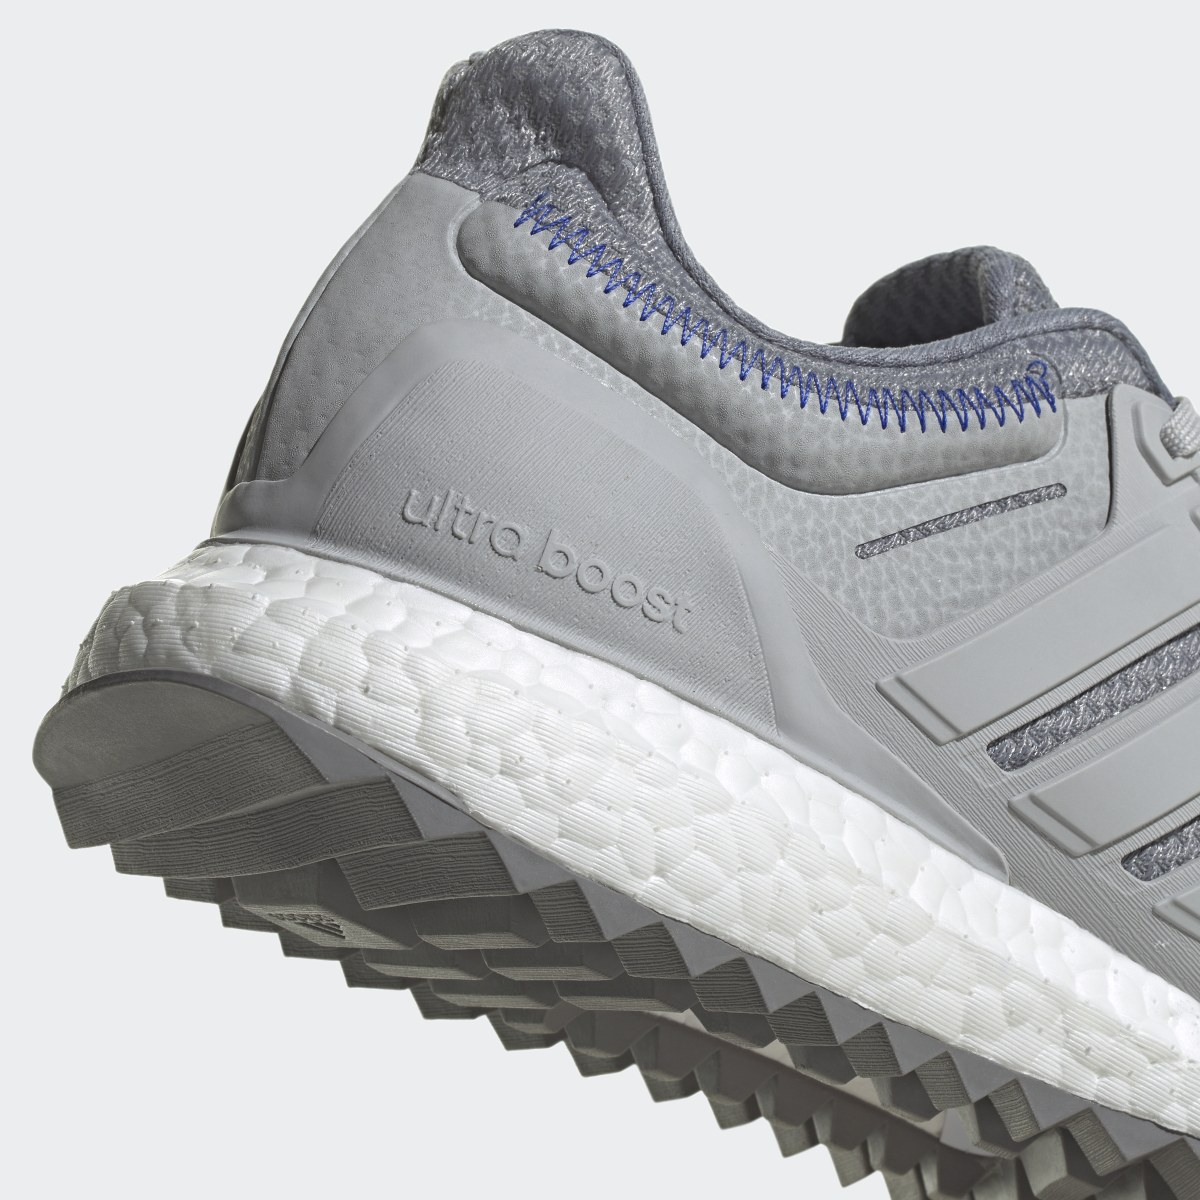 Adidas Chaussure Ultraboost DNA XXII Lifestyle Running Sportswear Capsule Collection. 10